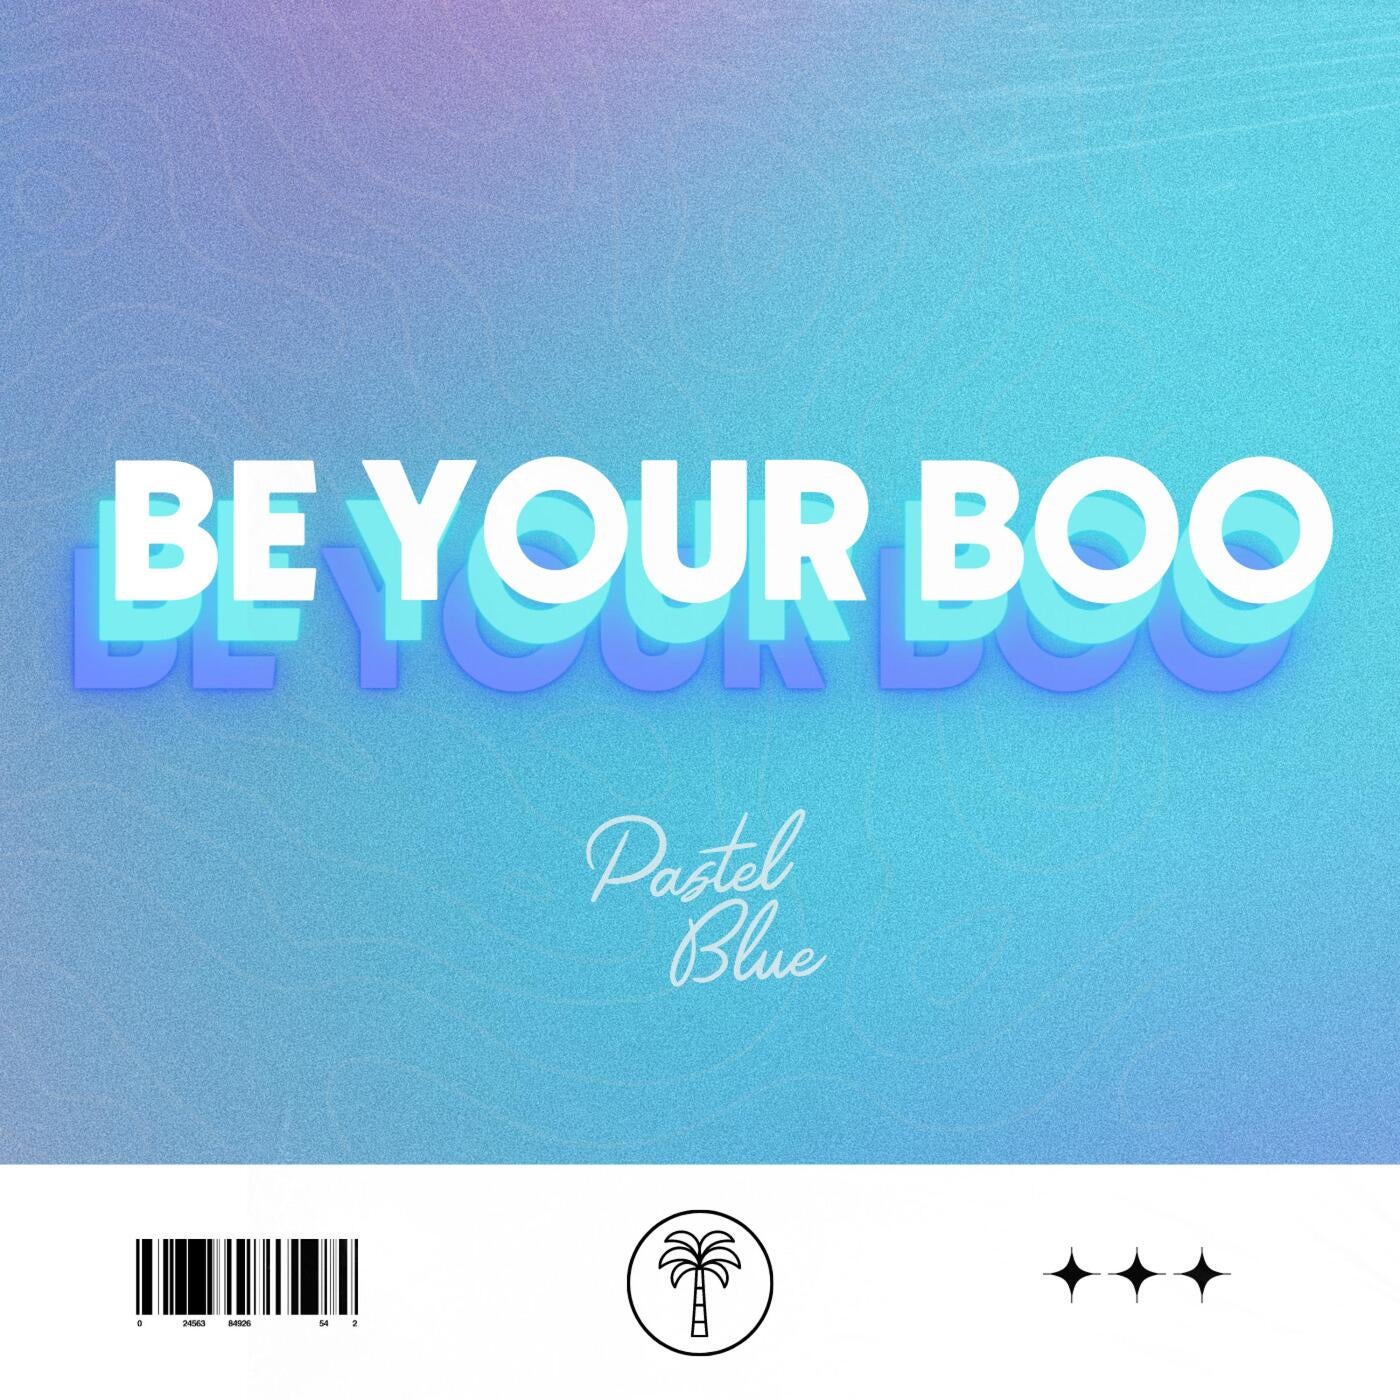 Be Your Boo